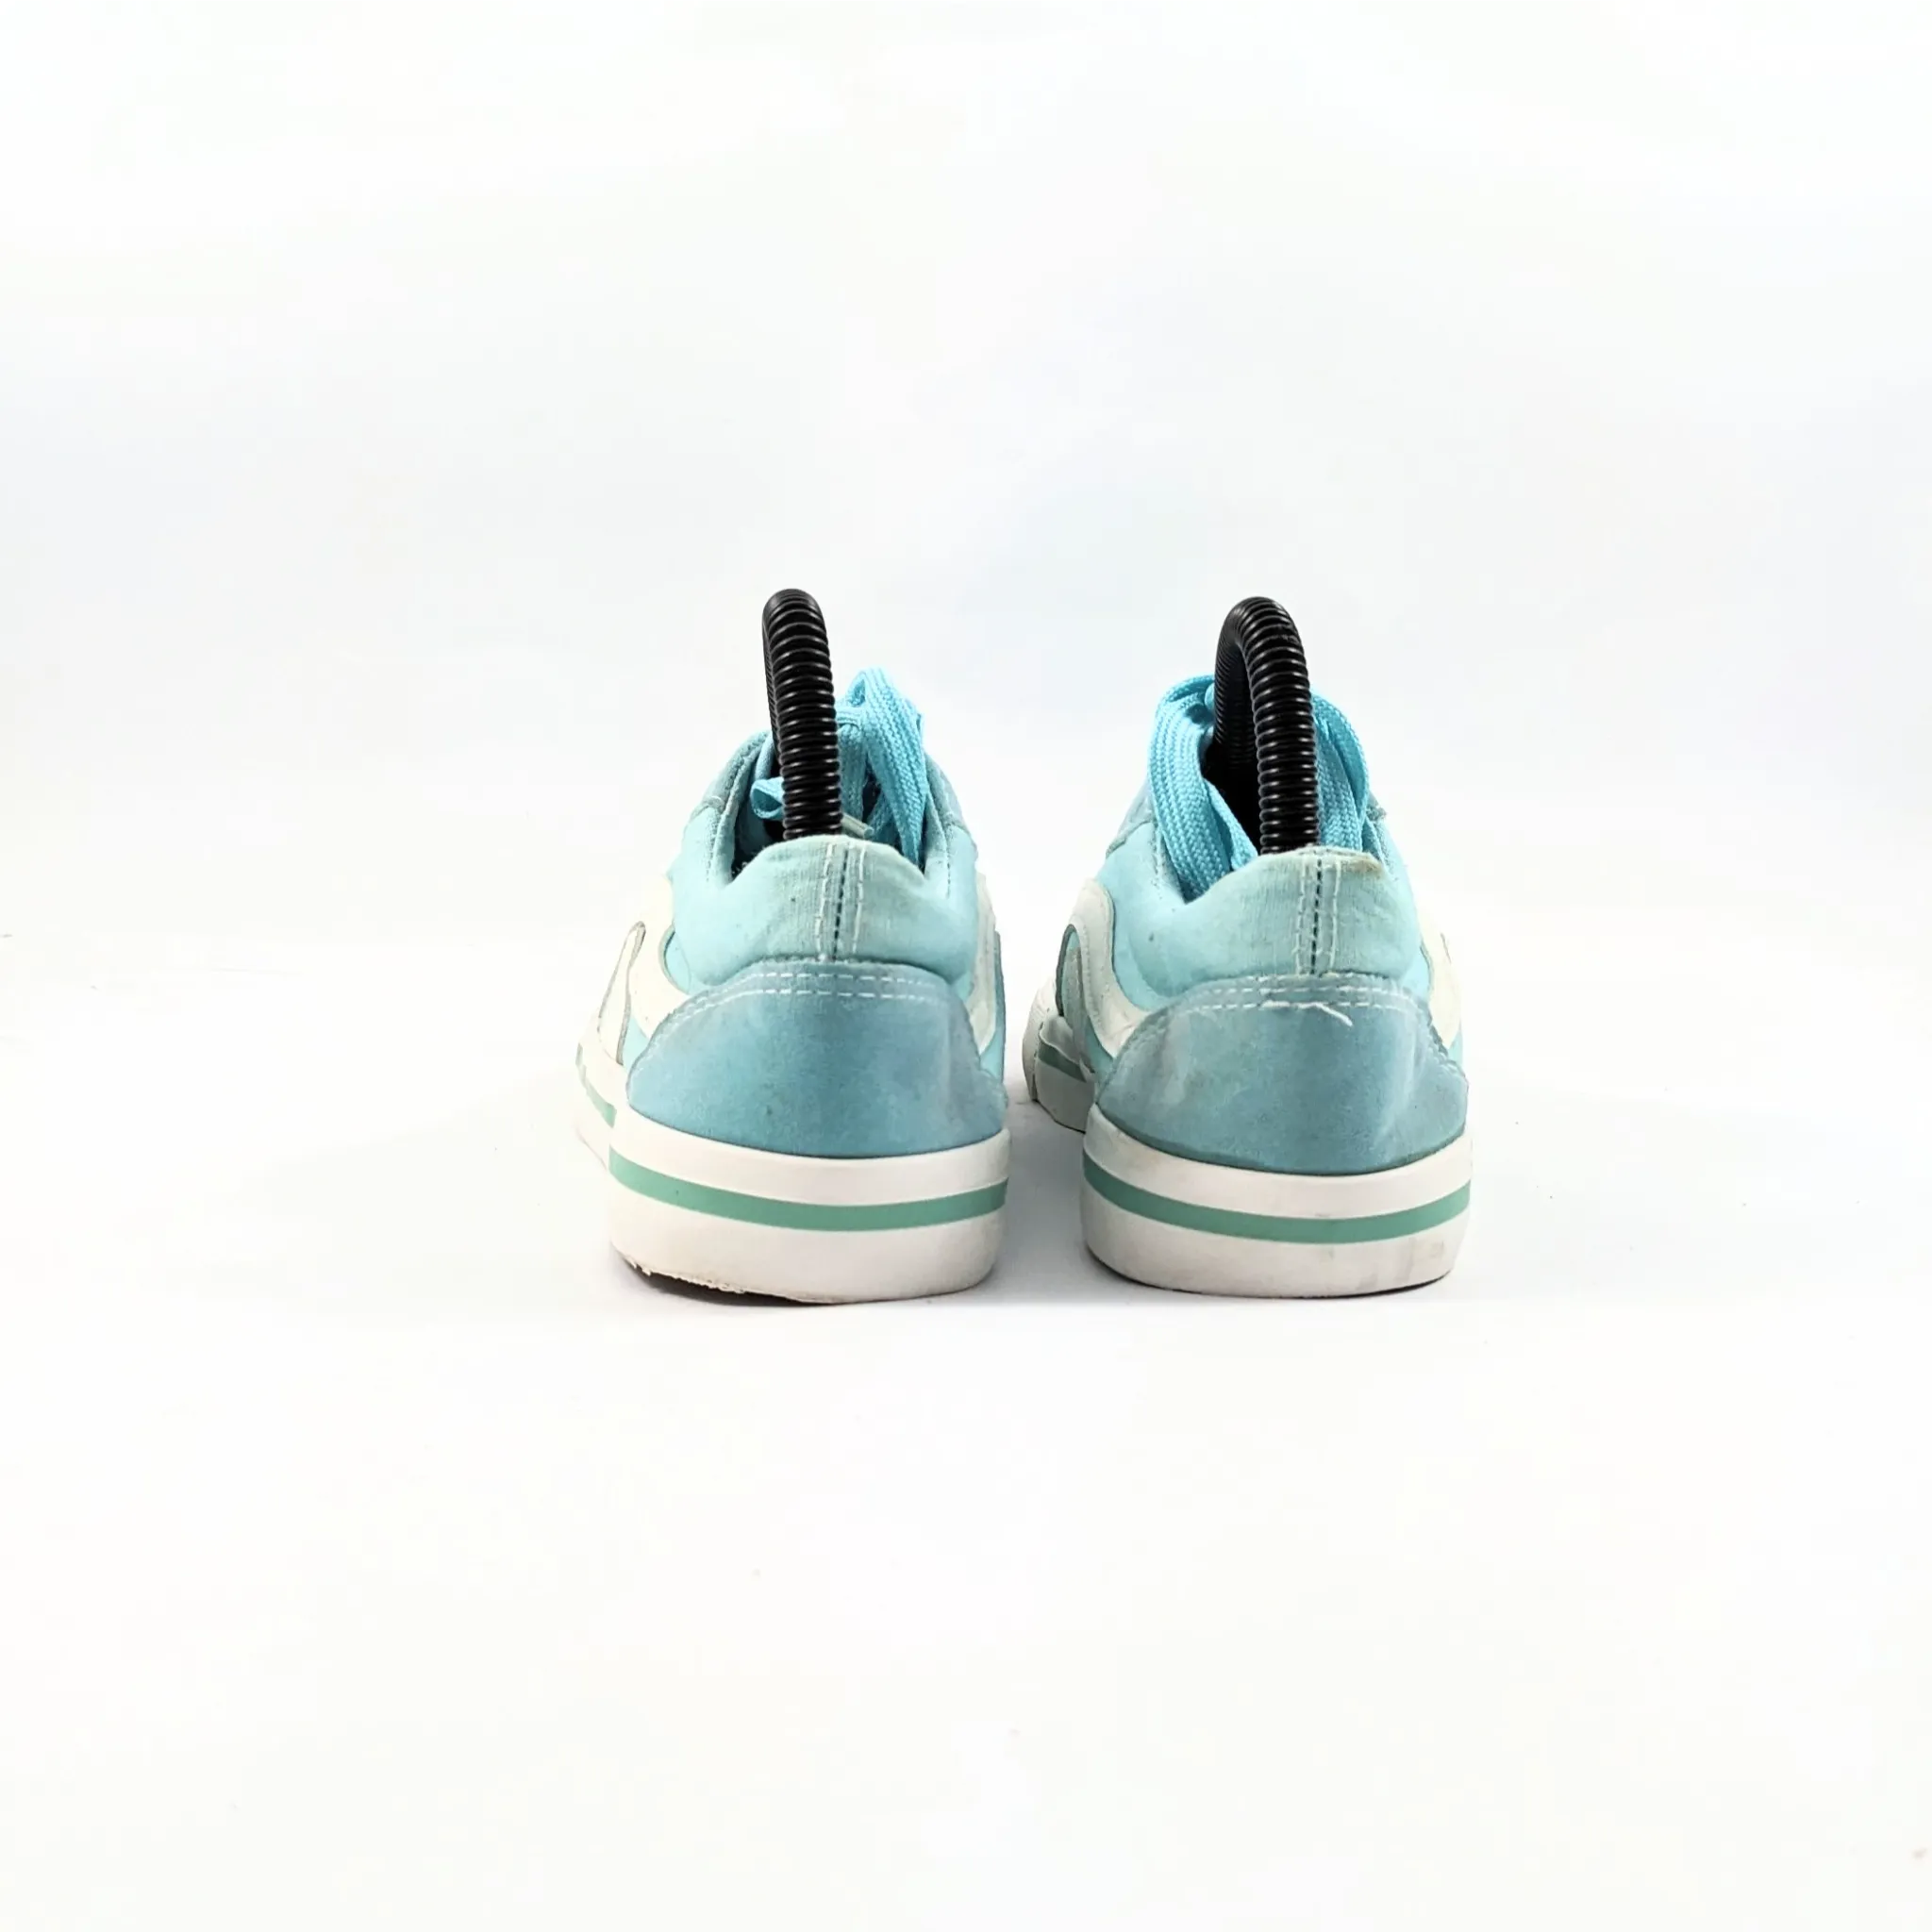 Alive Blue Sneakers